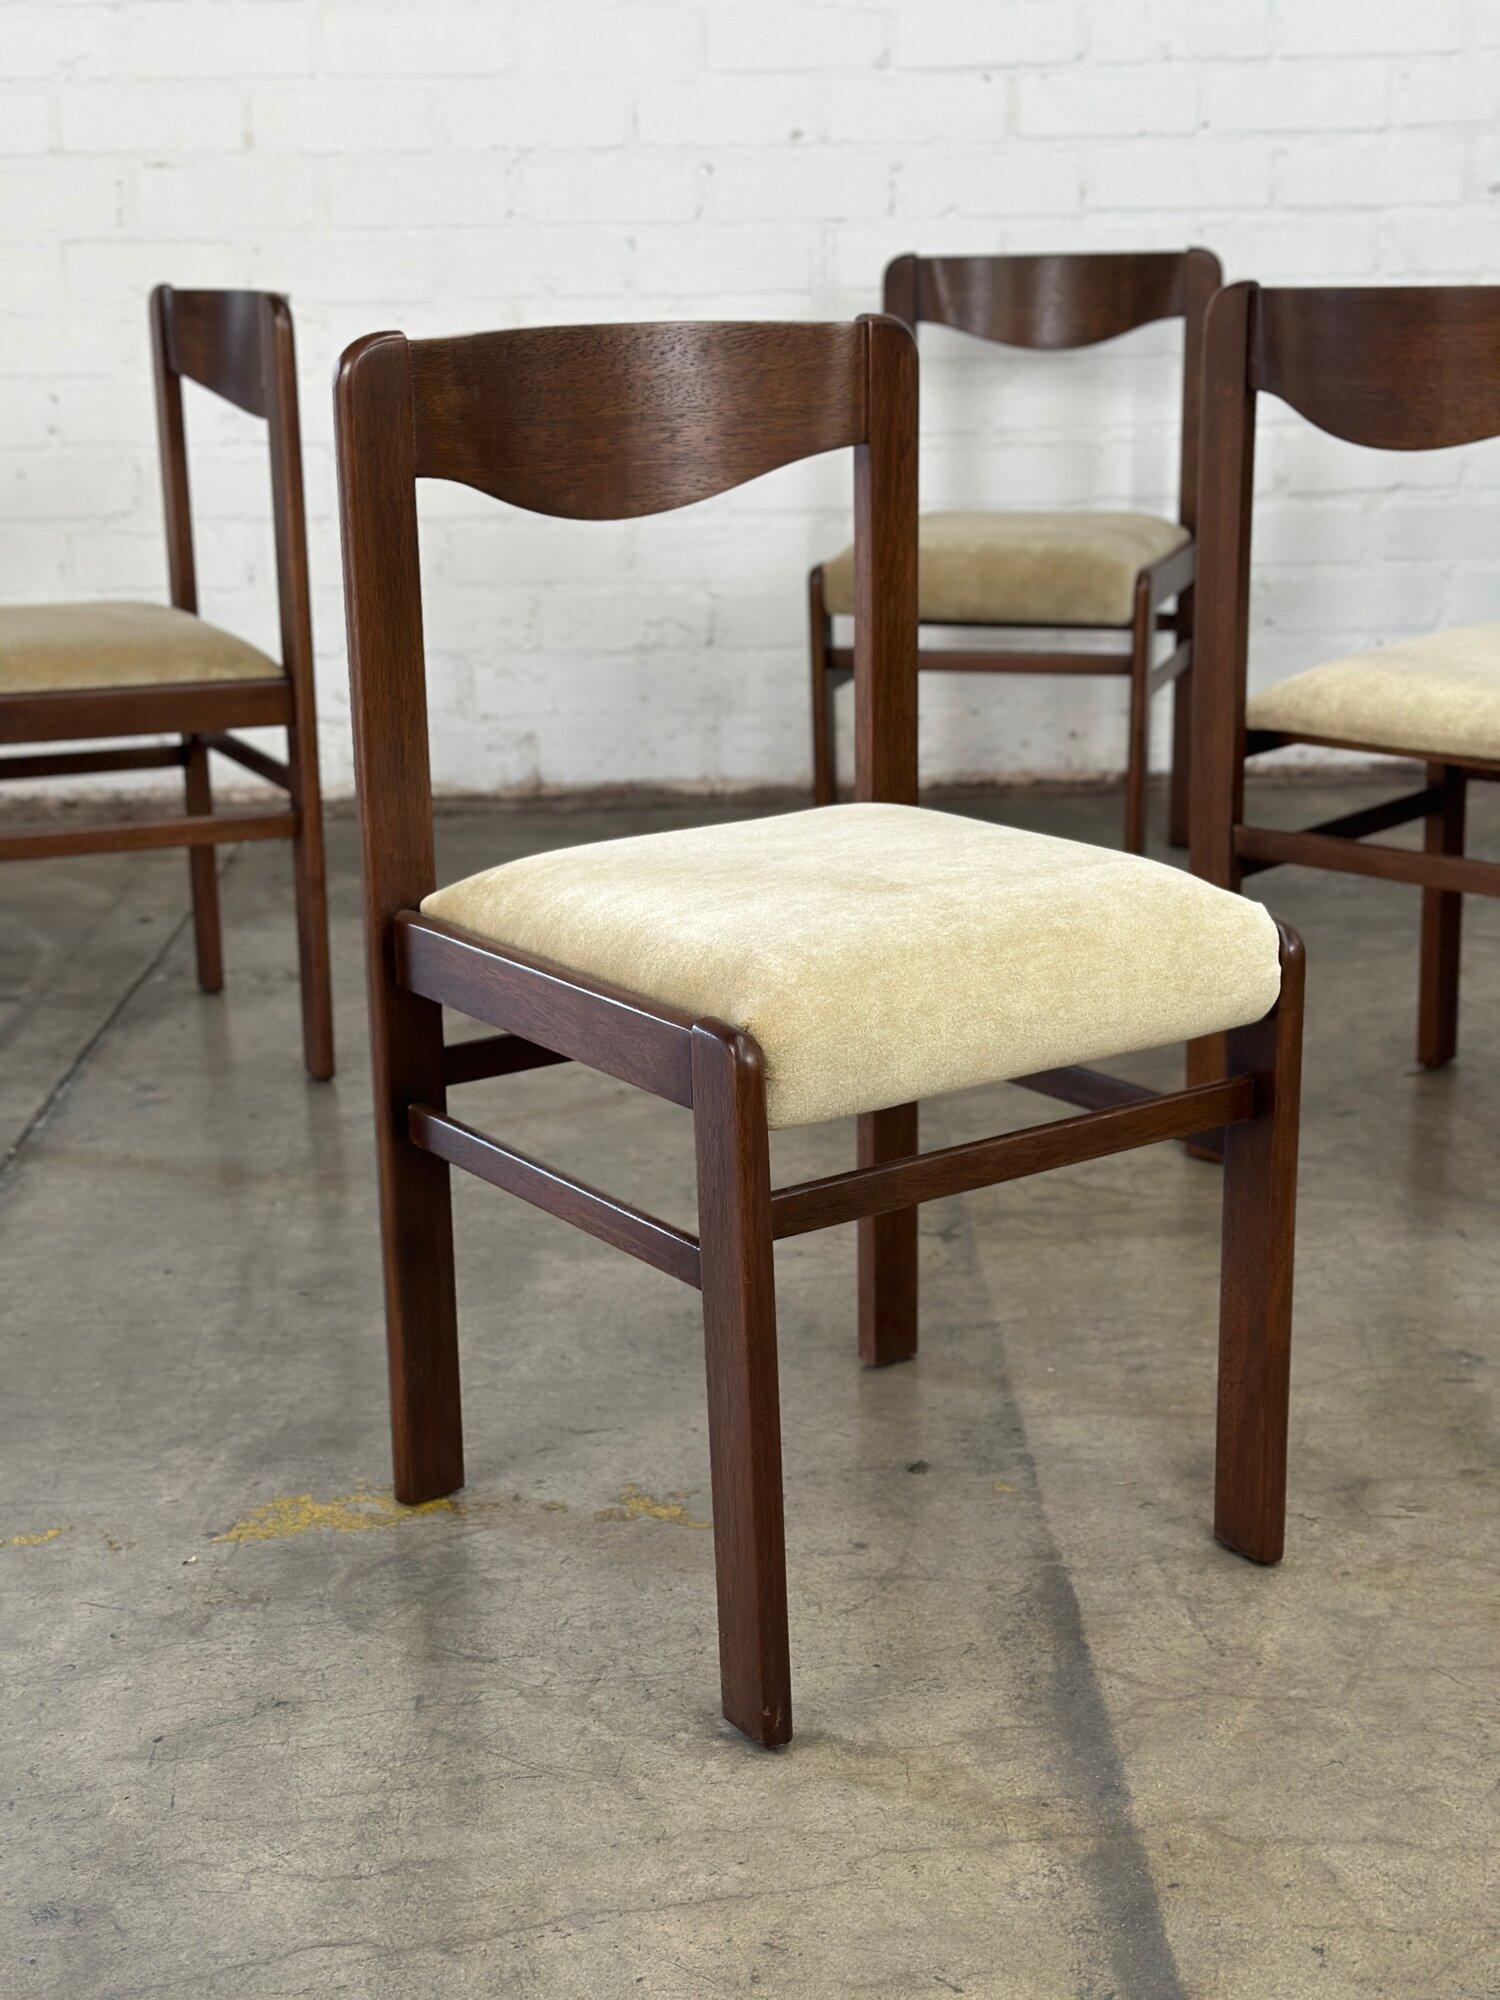 W17 D18 H31 SW15 SD16.5 SH17.5

Minimal dining chairs with a great molded curved back seat. Chairs features newly refinished frames and fresh high pile upholstery. Price is for the set of six chairs. 

